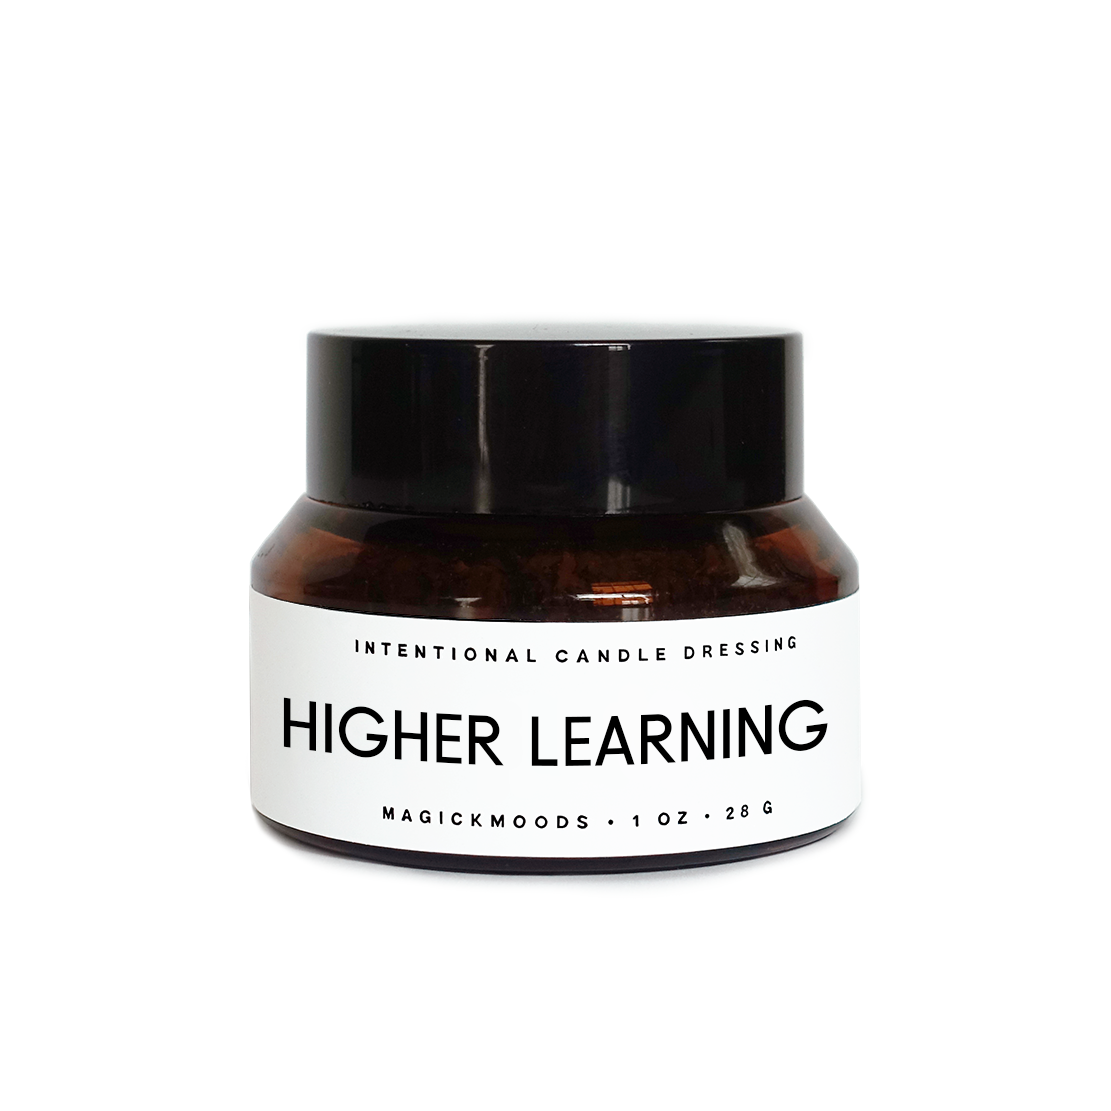 Higher Learning Candle Dressing